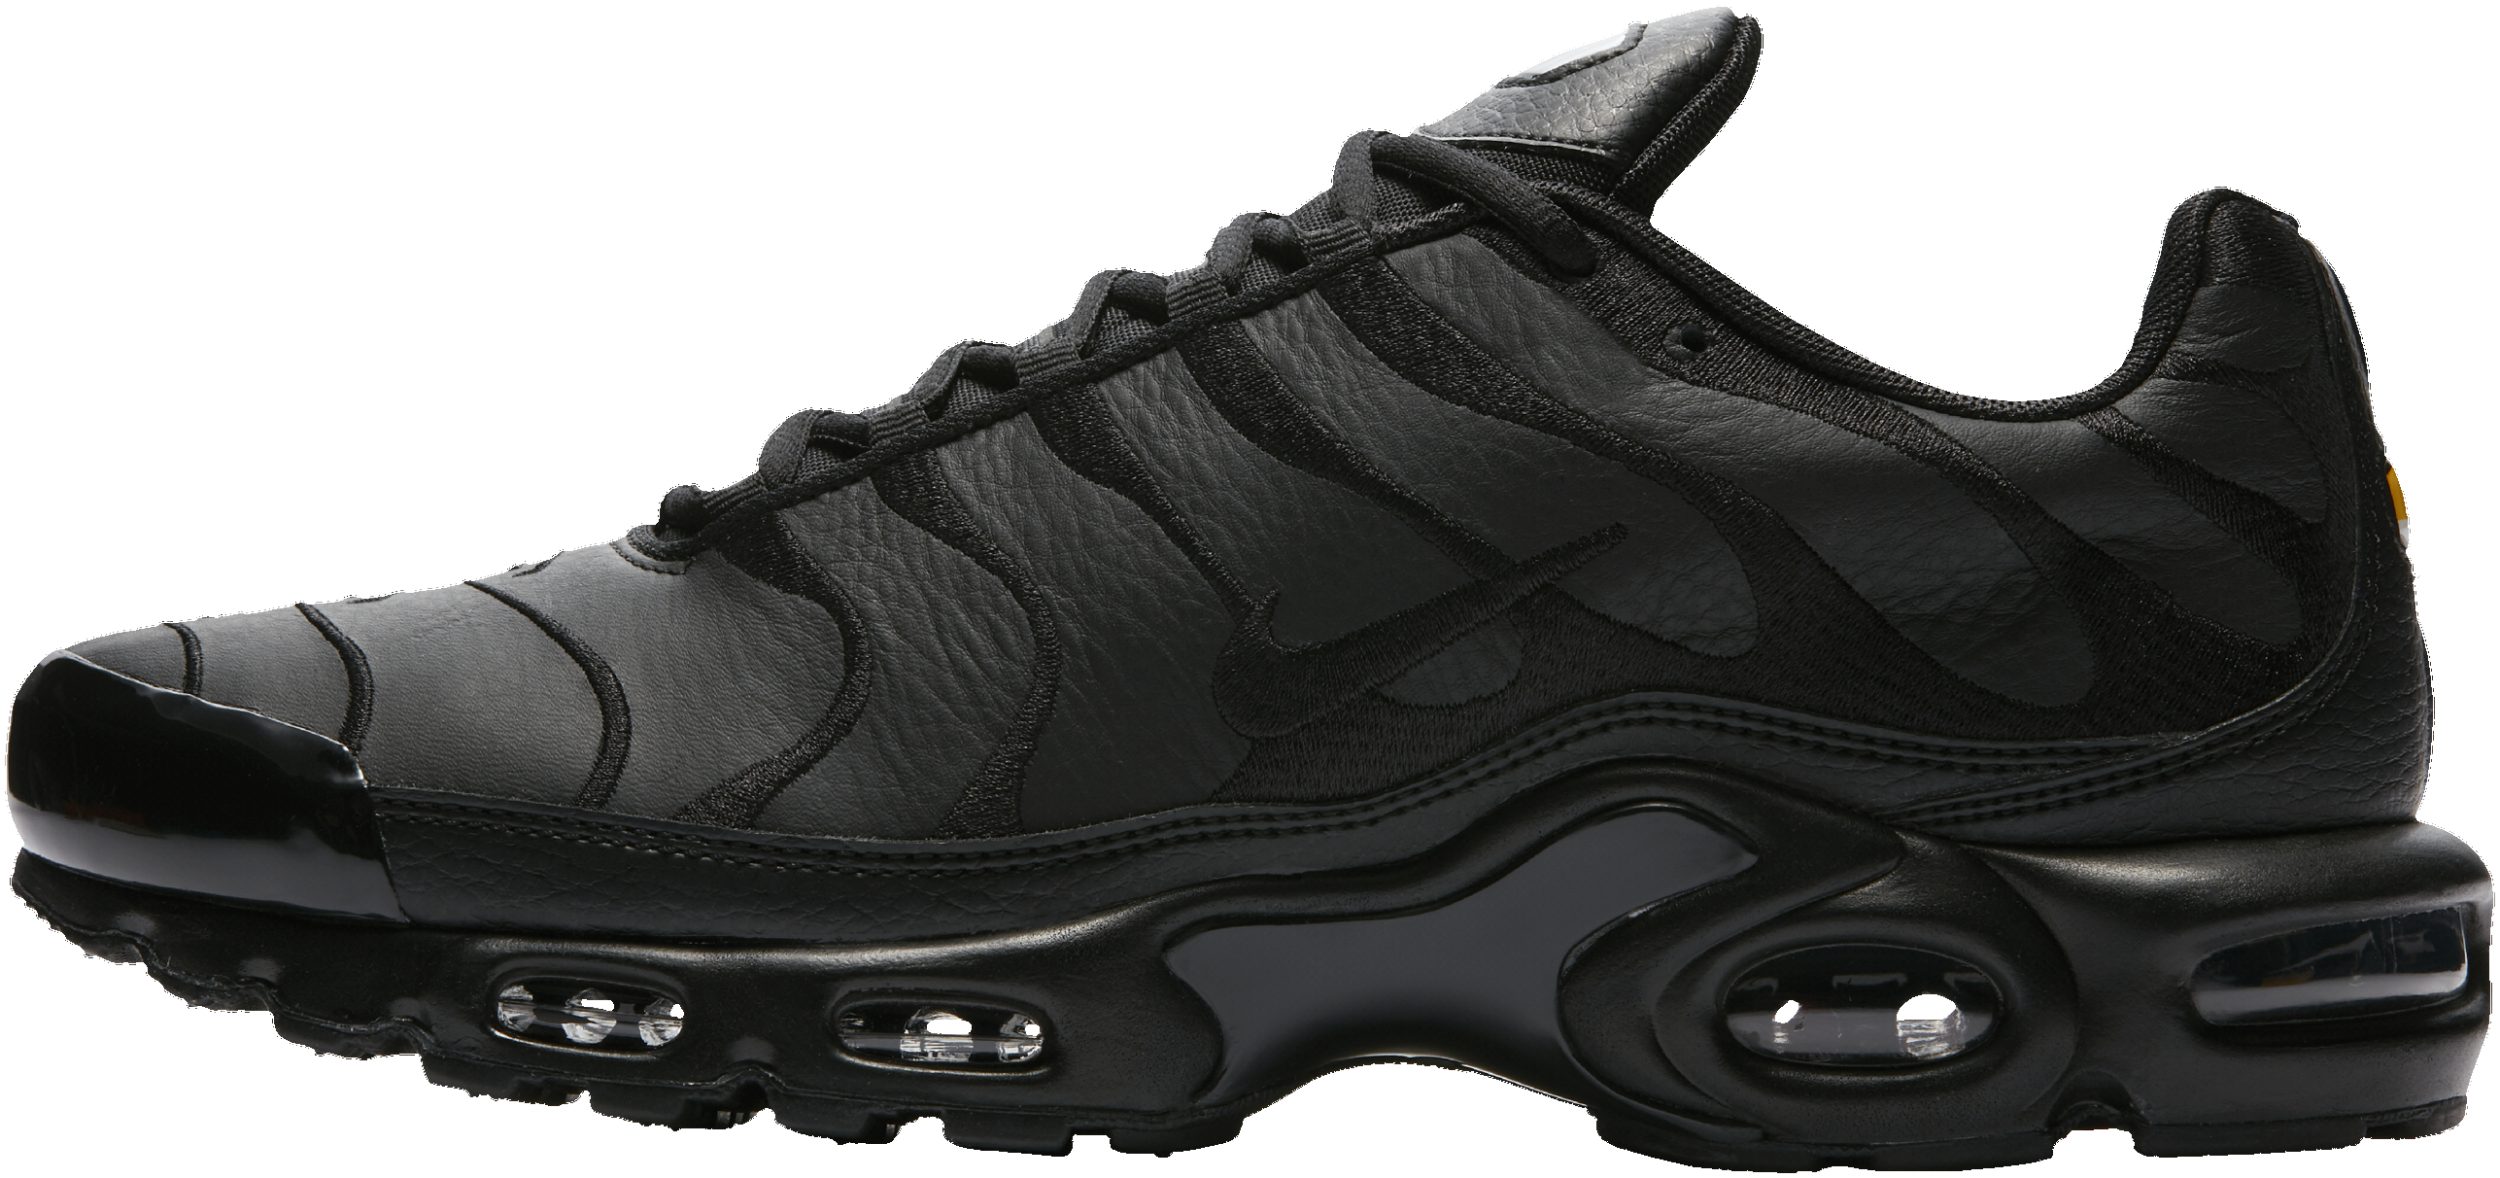 Only $119 + Review of Nike Air Max Plus 